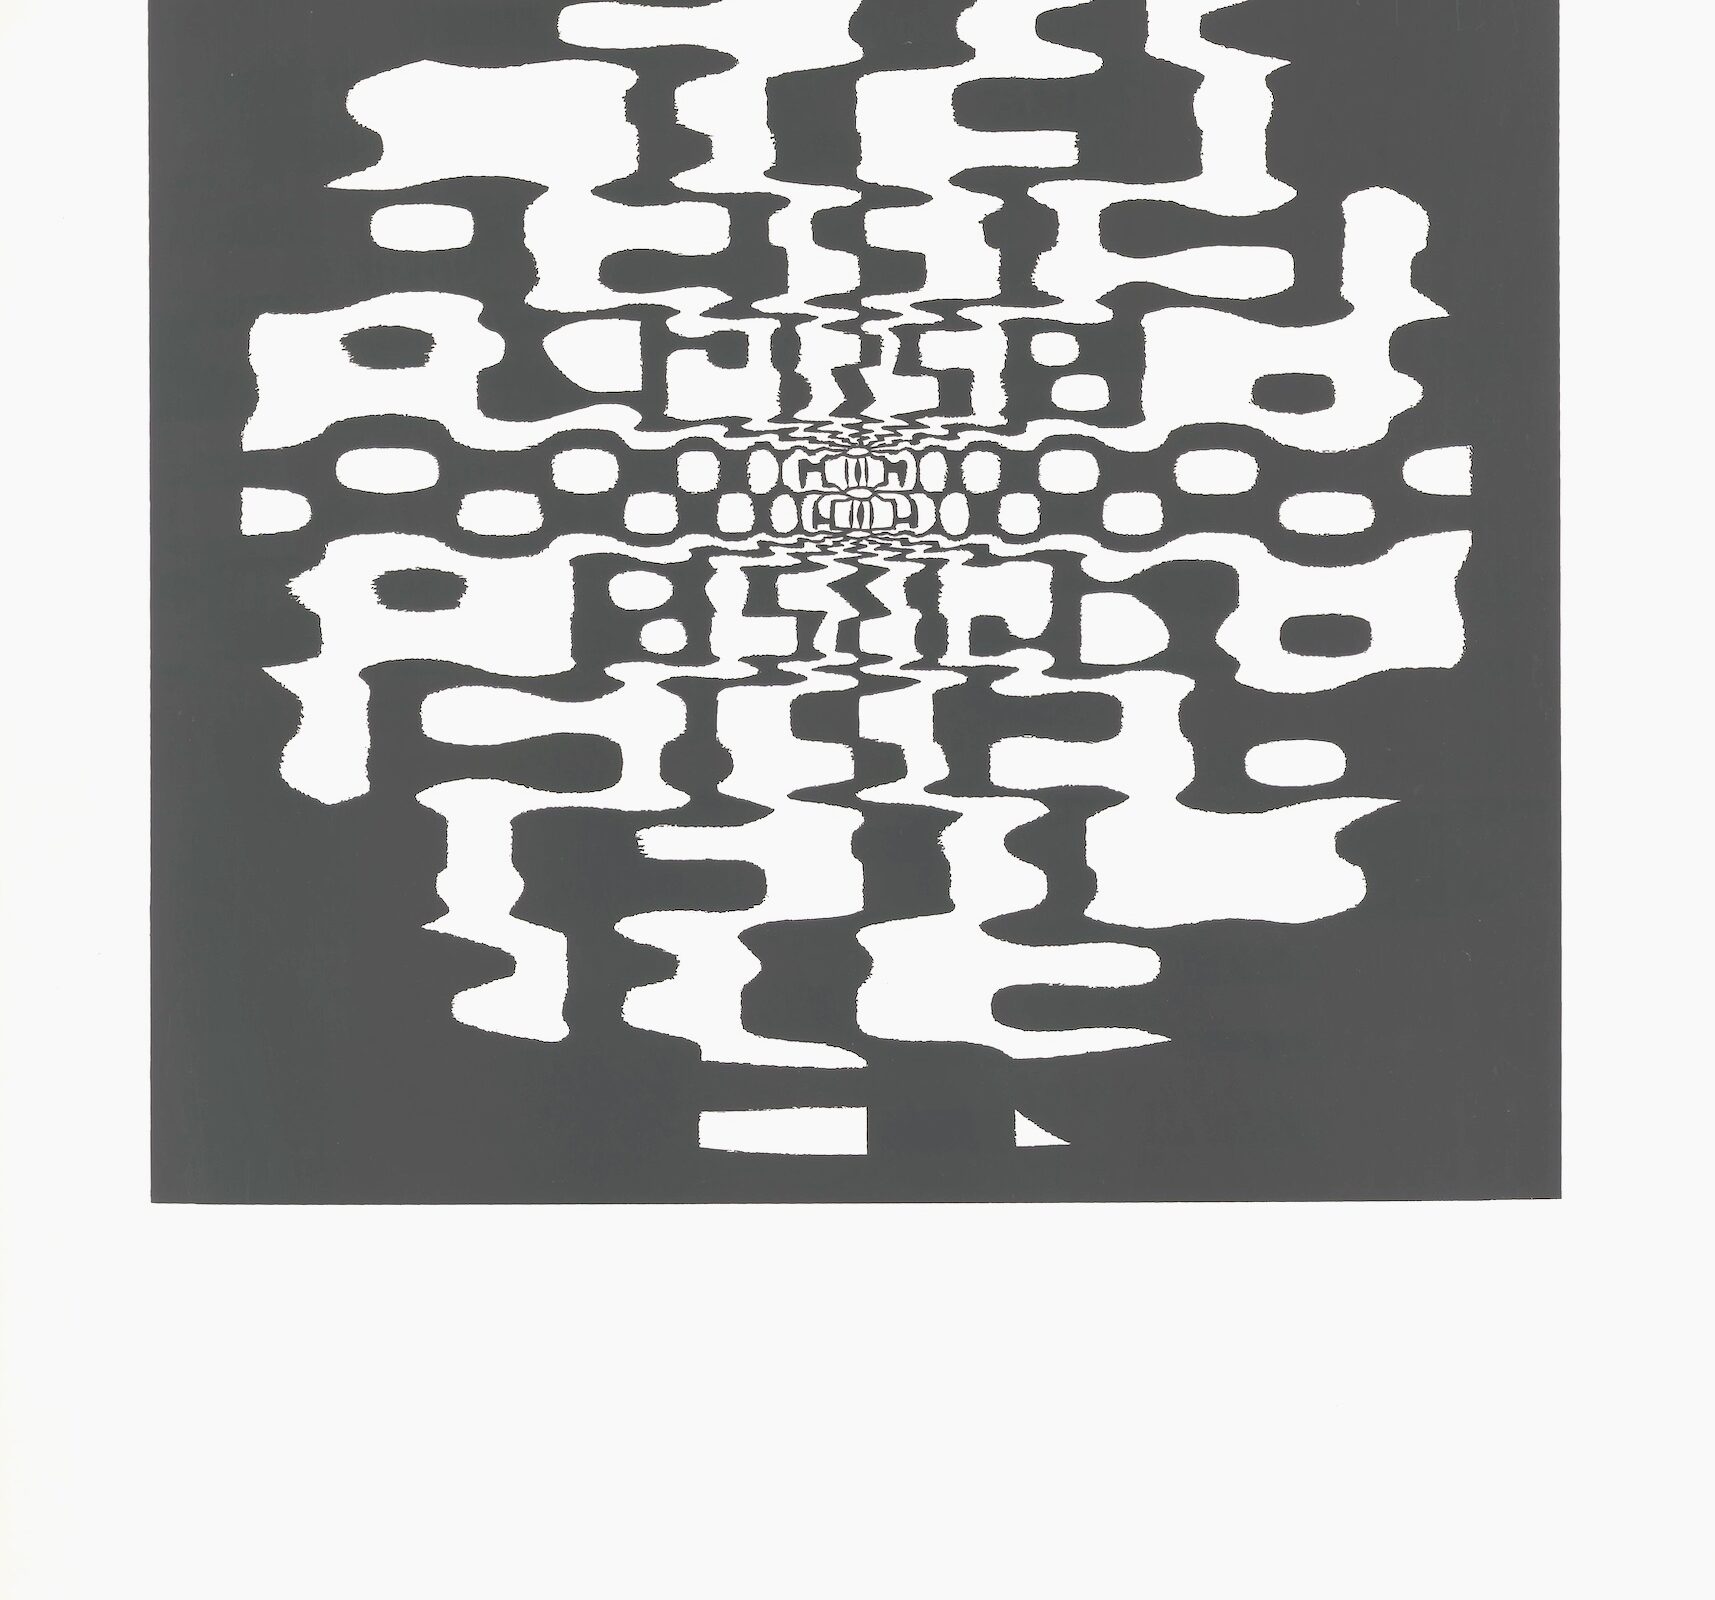 Georg Nees, Untitled, silkscreen, 70 x 100 cm (size of paper), unlimited, 1965.